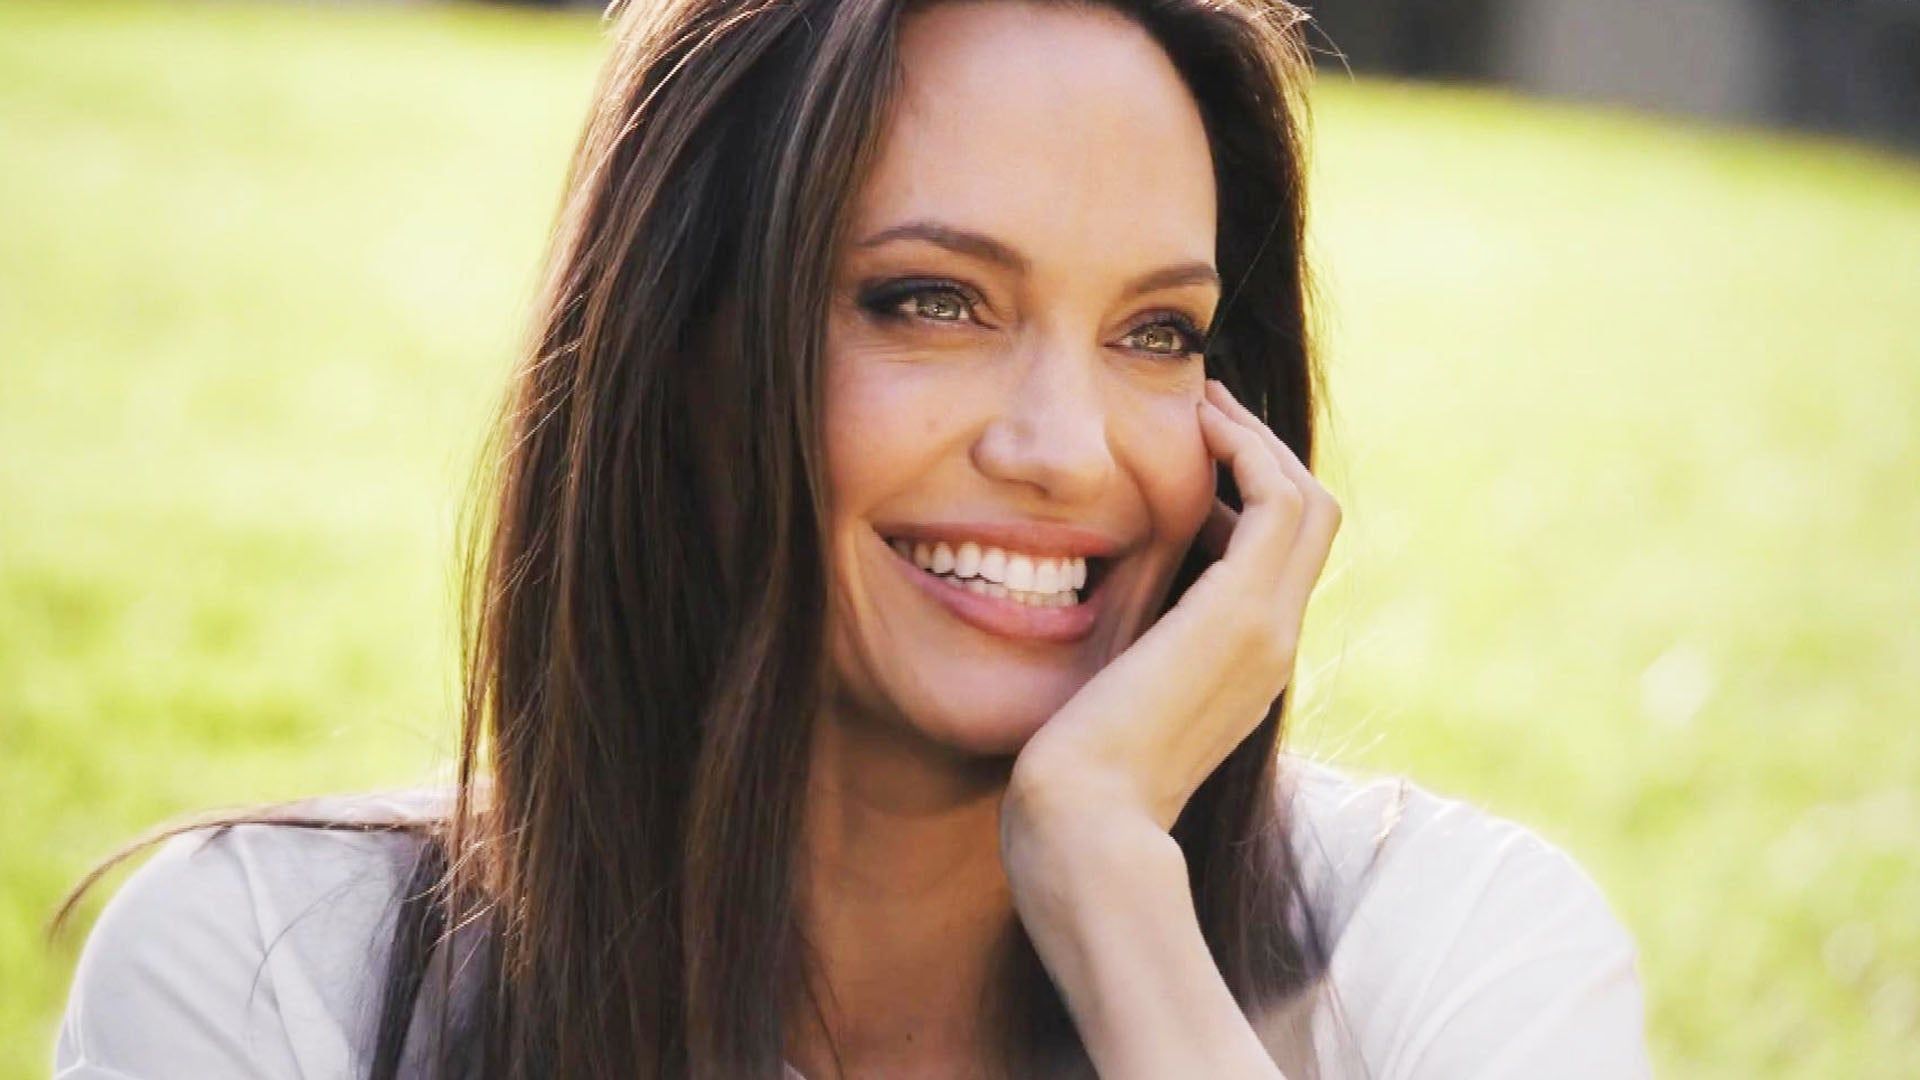 Angelina Jolie Says She's Been Working on 'Healing' Her Family After Brad Pitt Split